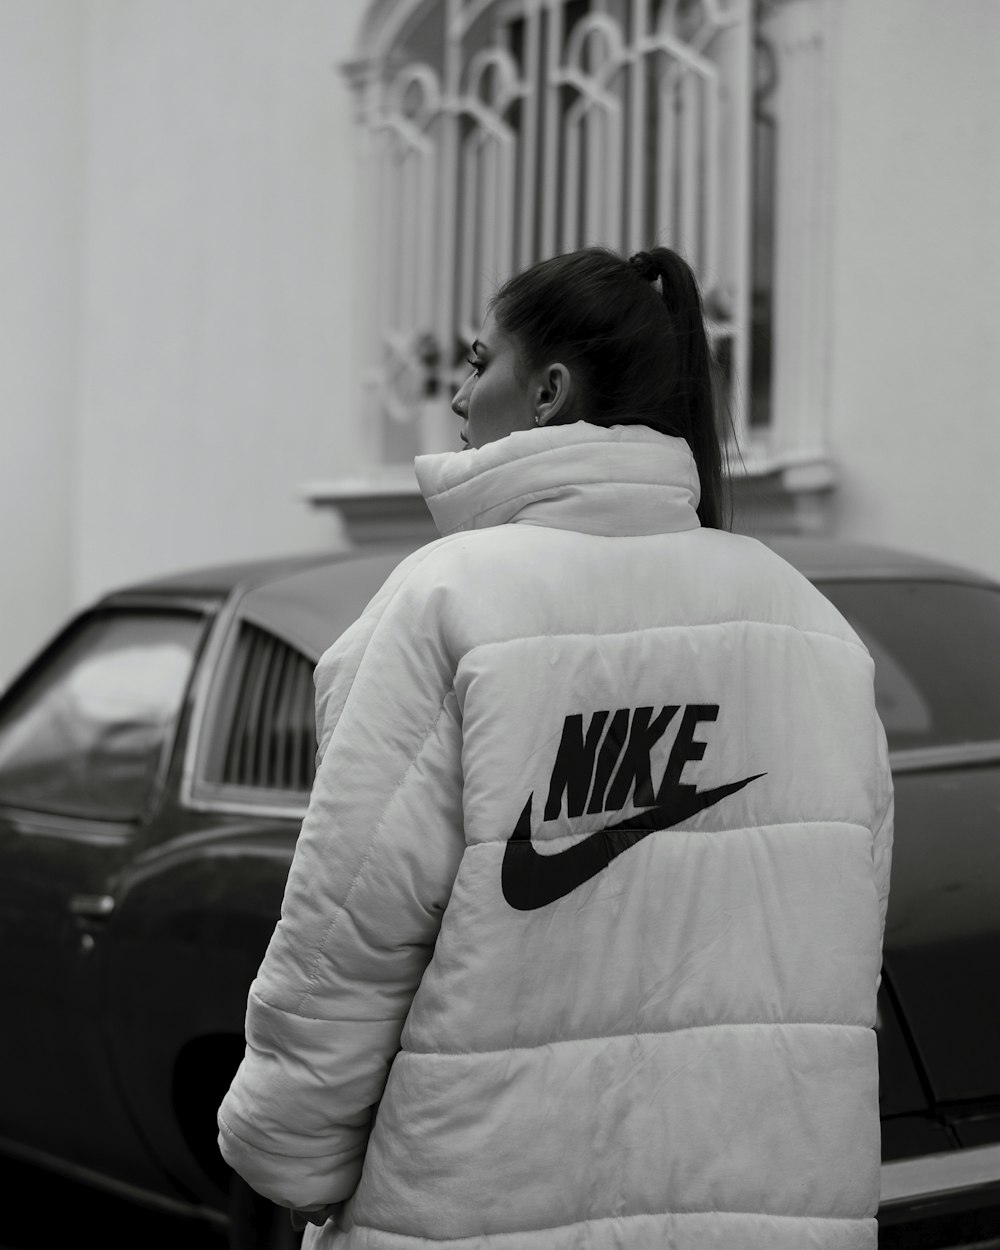 Nike Clothing Pictures | Download Free Images on Unsplash